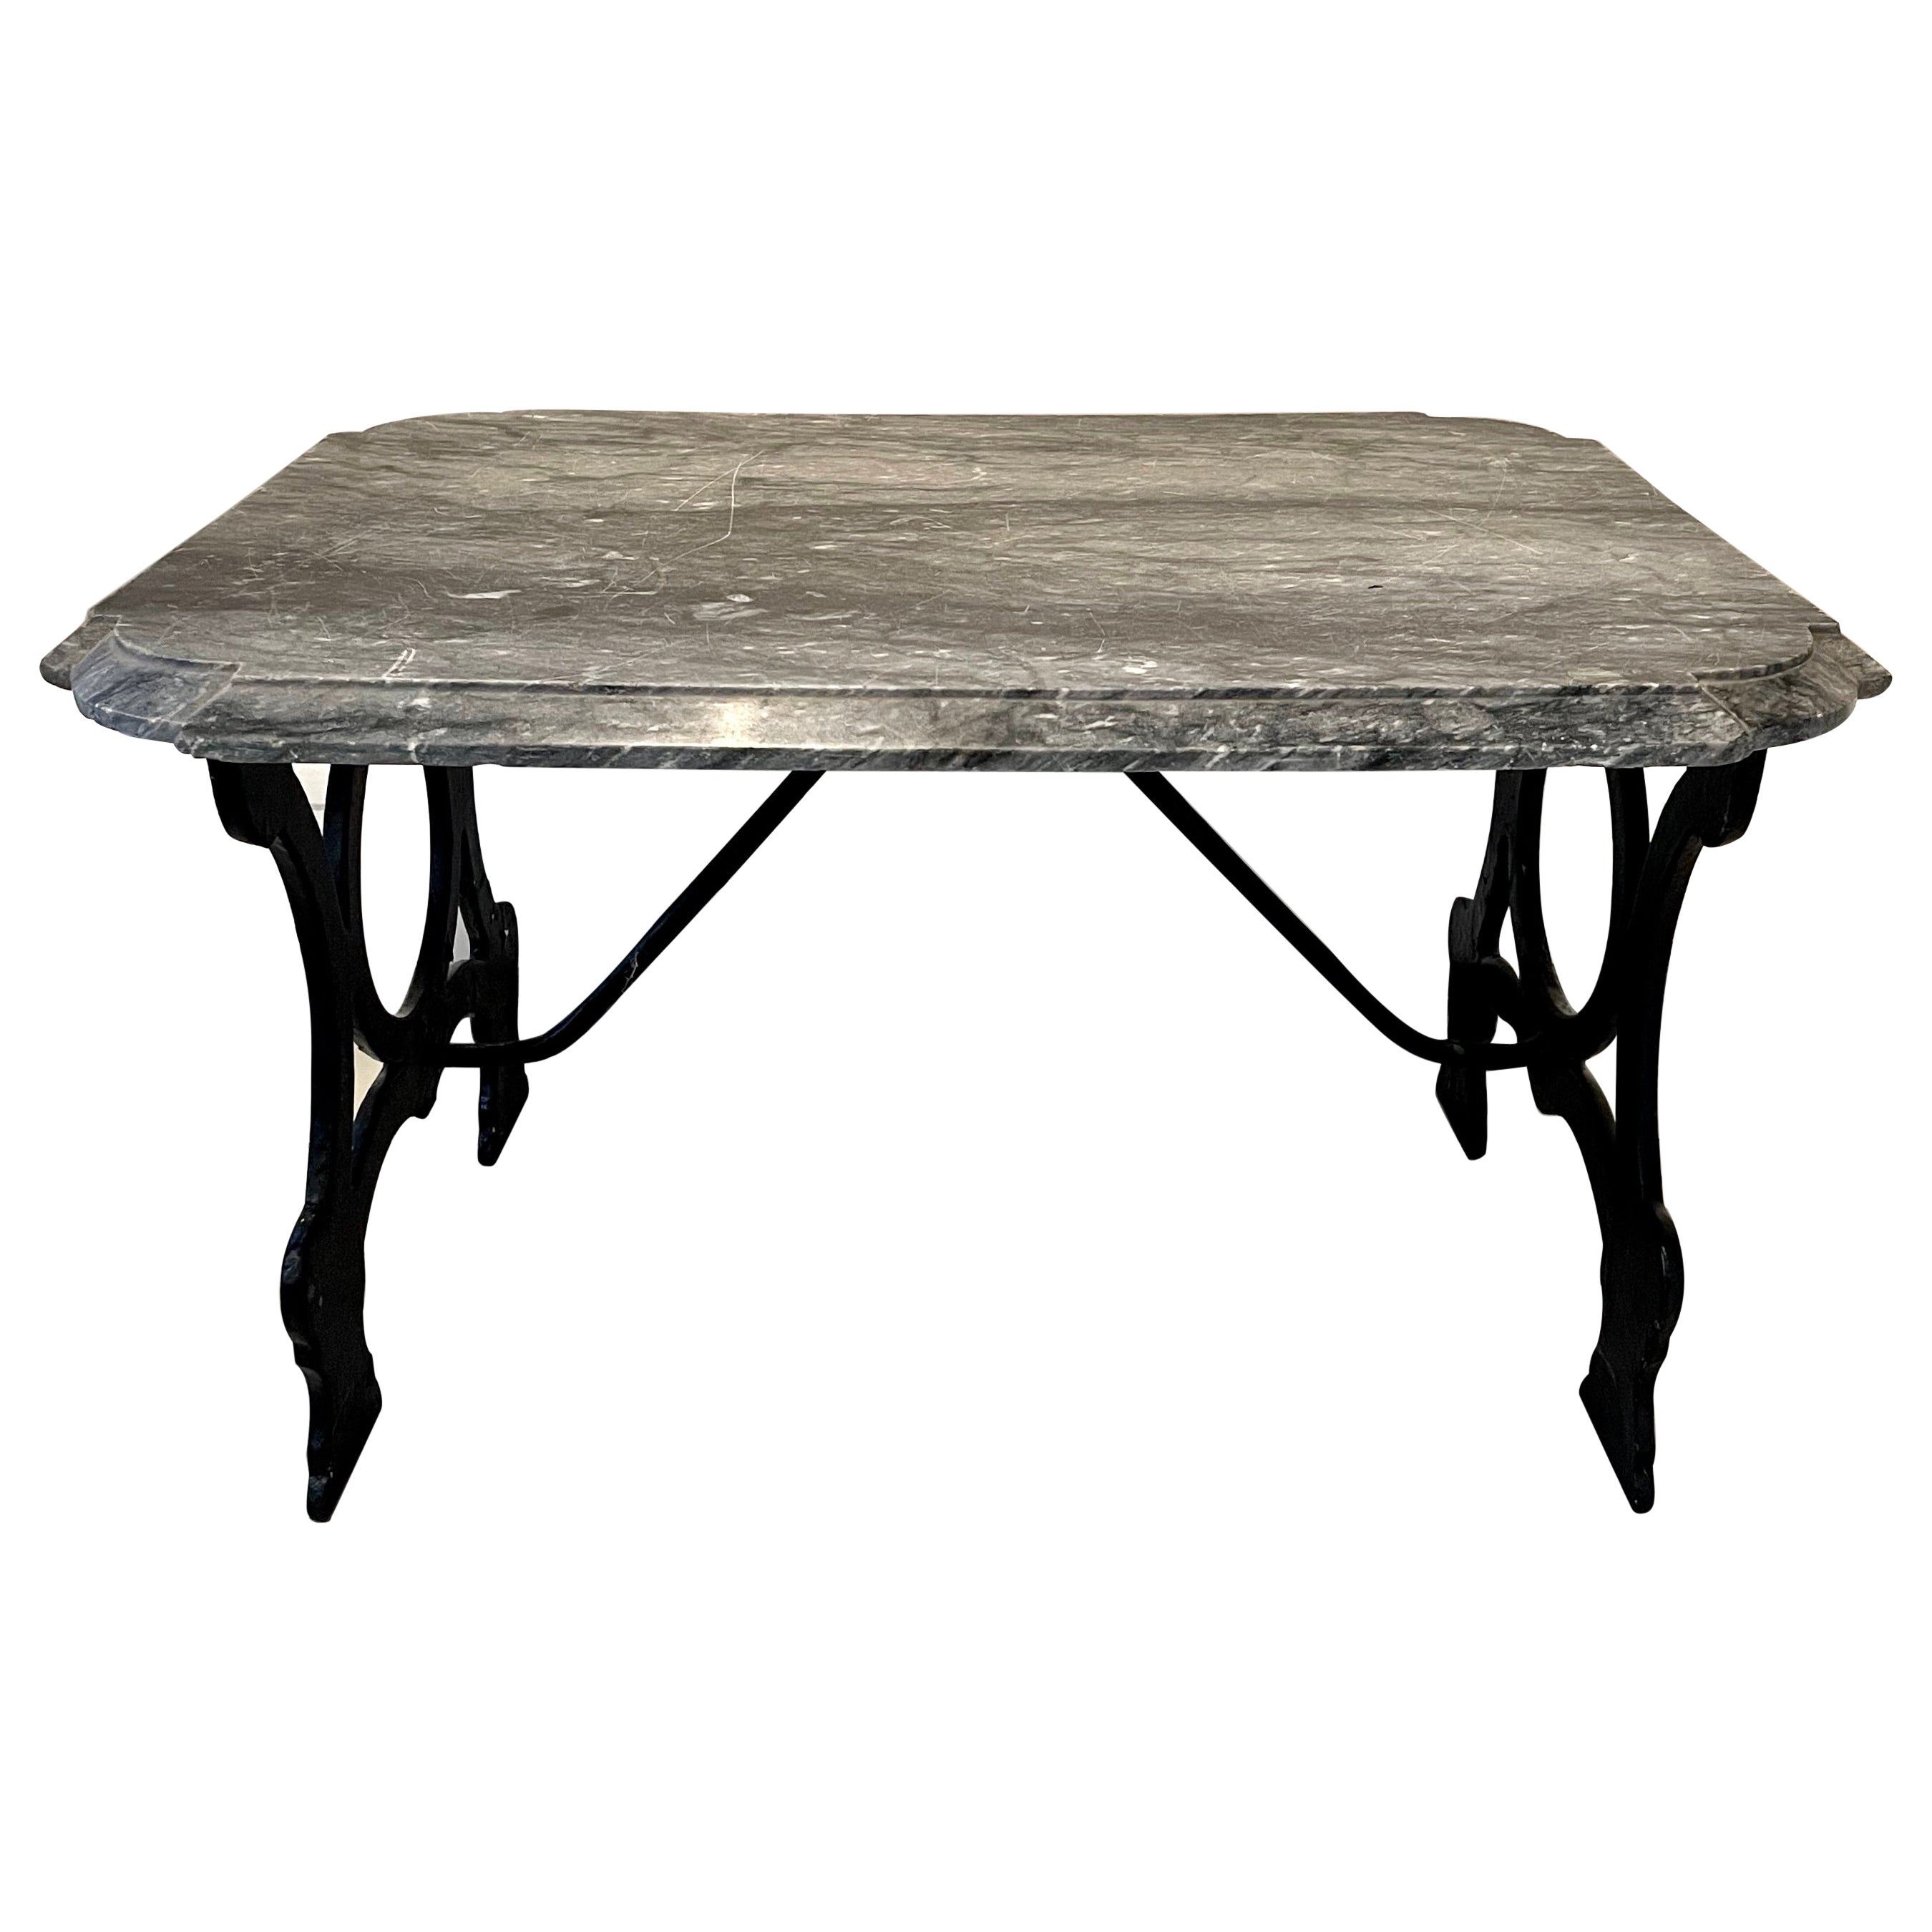 English 19th Century Rectangular Cast Iron Table with Grey Marble Top For Sale